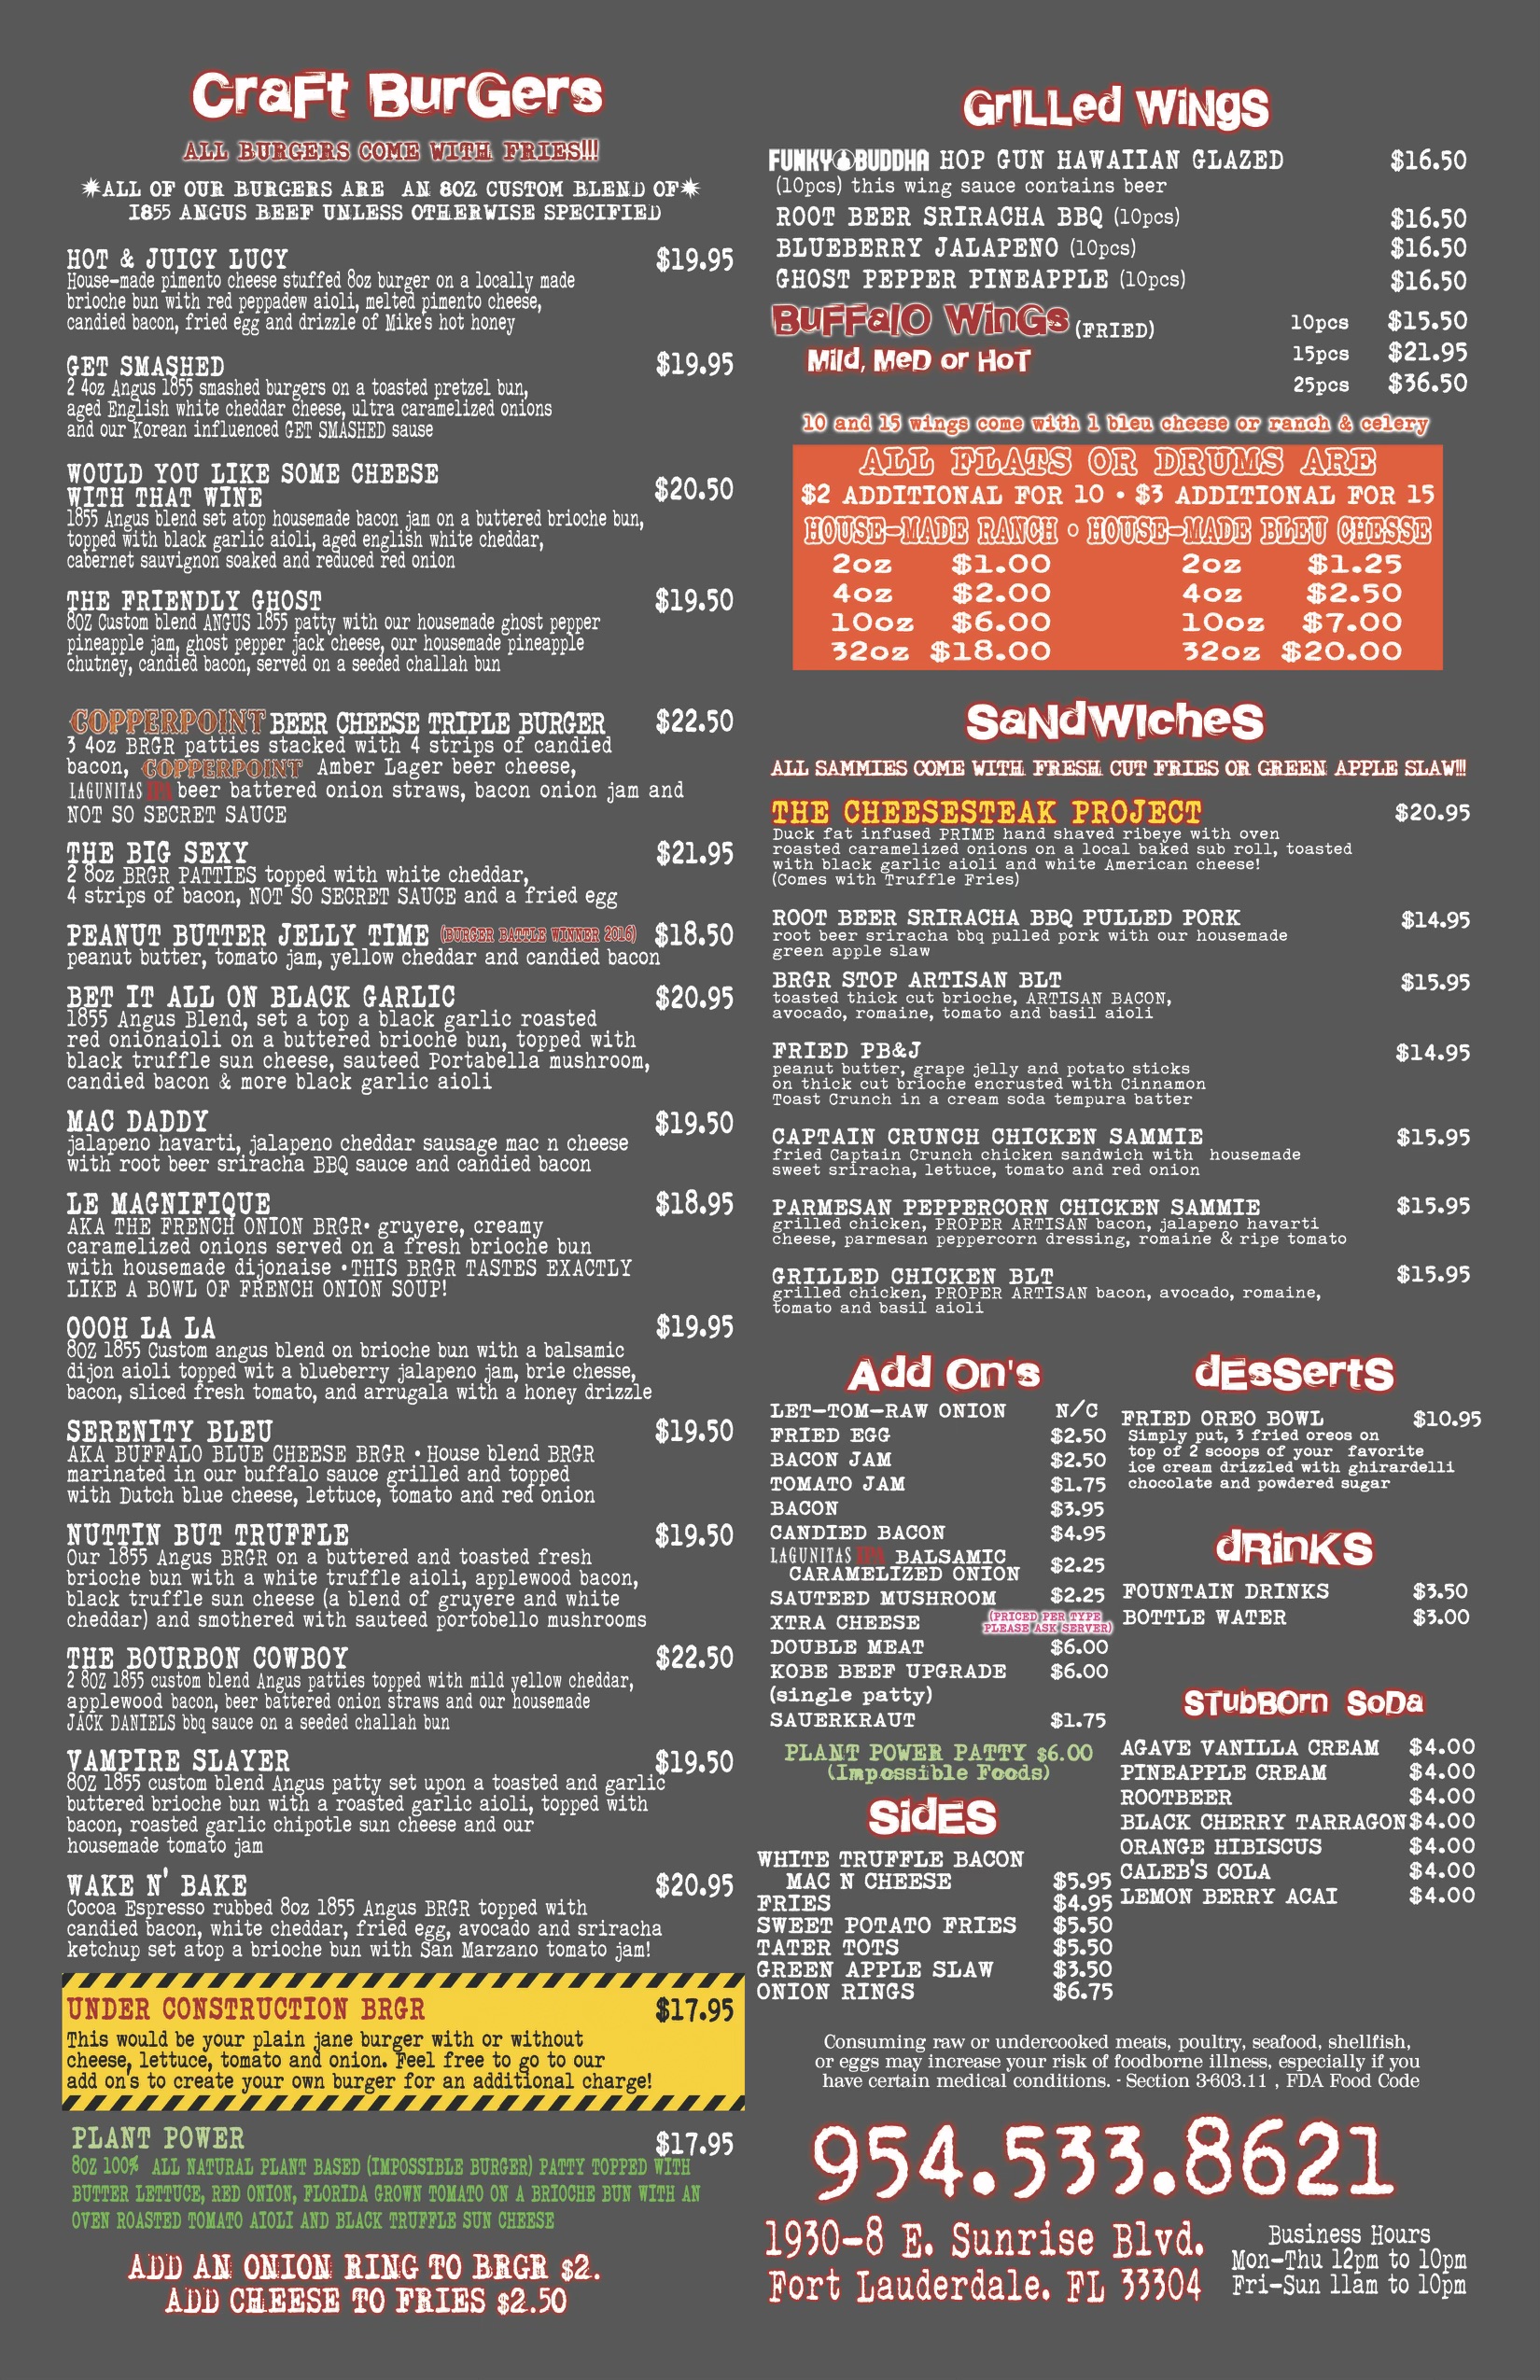 Menu showcasing a selection of craft burgers, grilled wings, sandwiches, add-ons, sides, desserts, and drinks, along with contact information for BRGRSTOP."